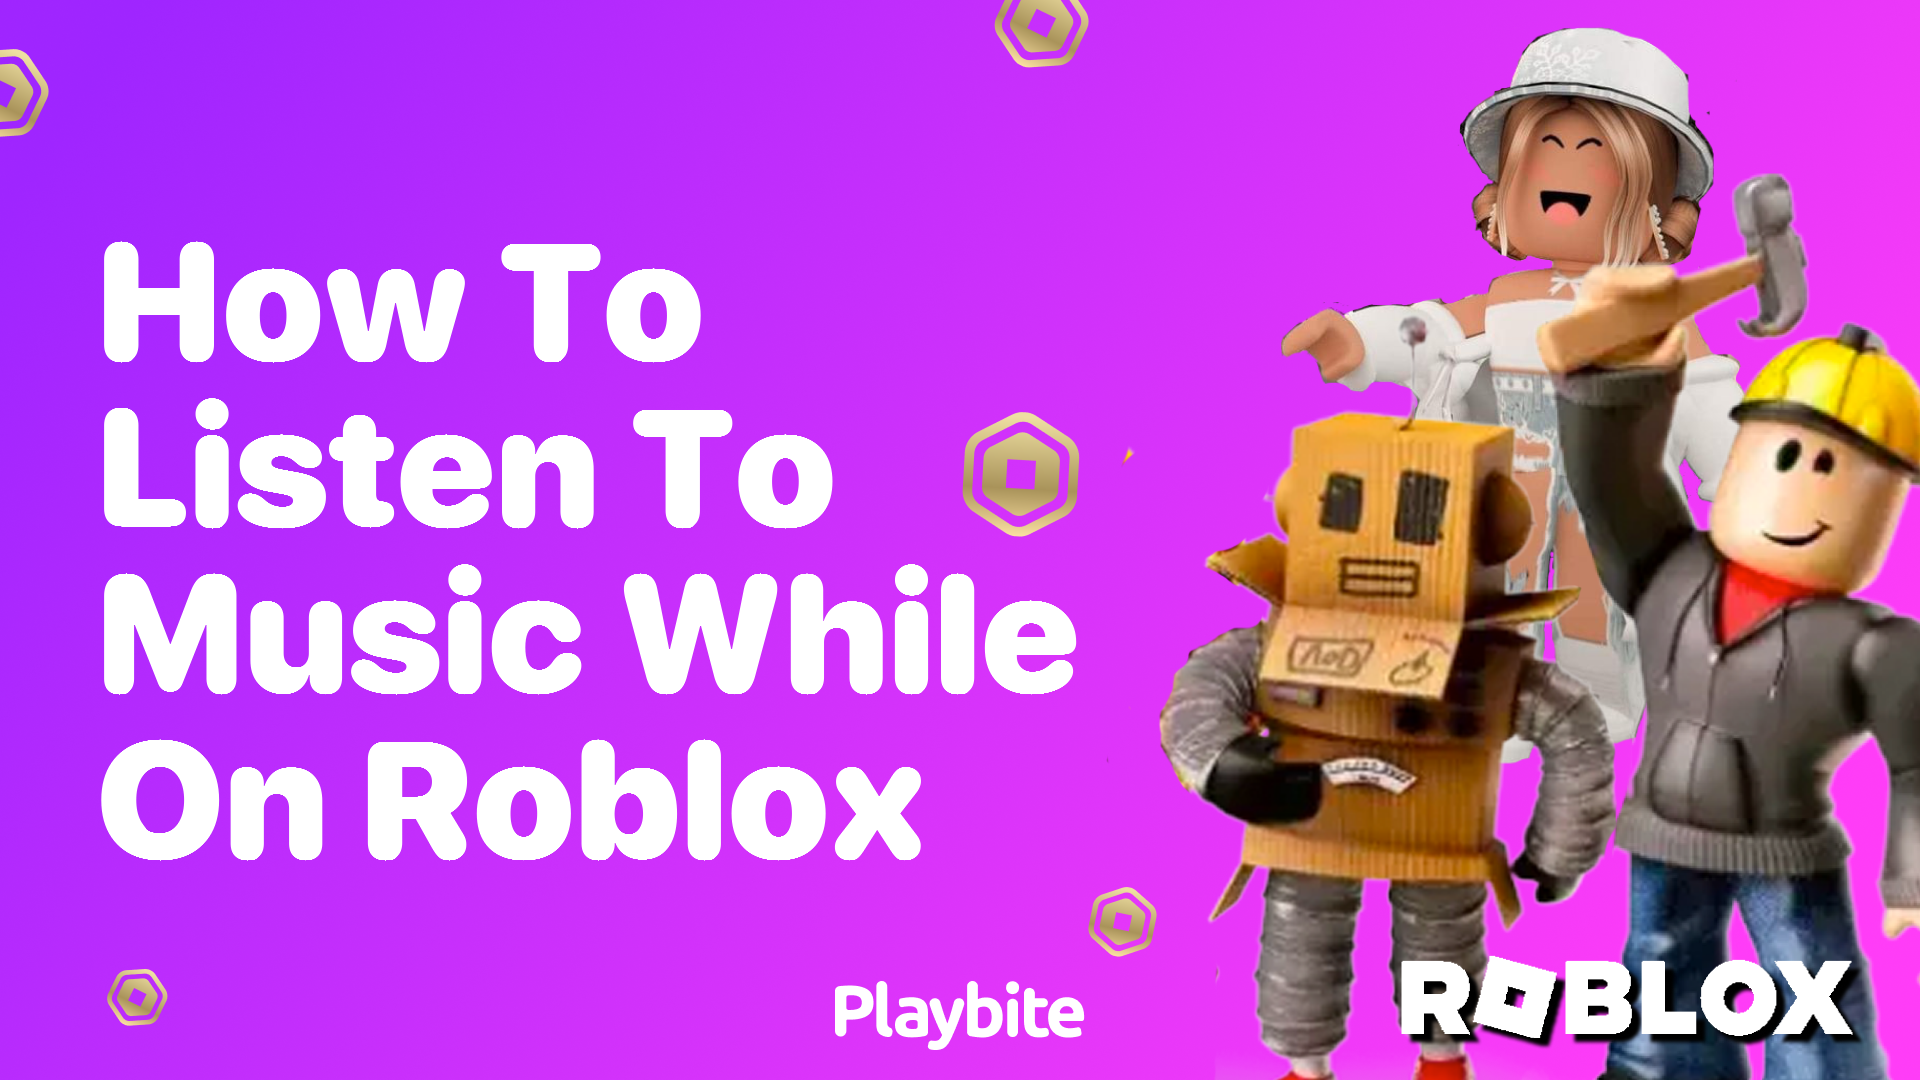 How to Listen to Music While on Roblox